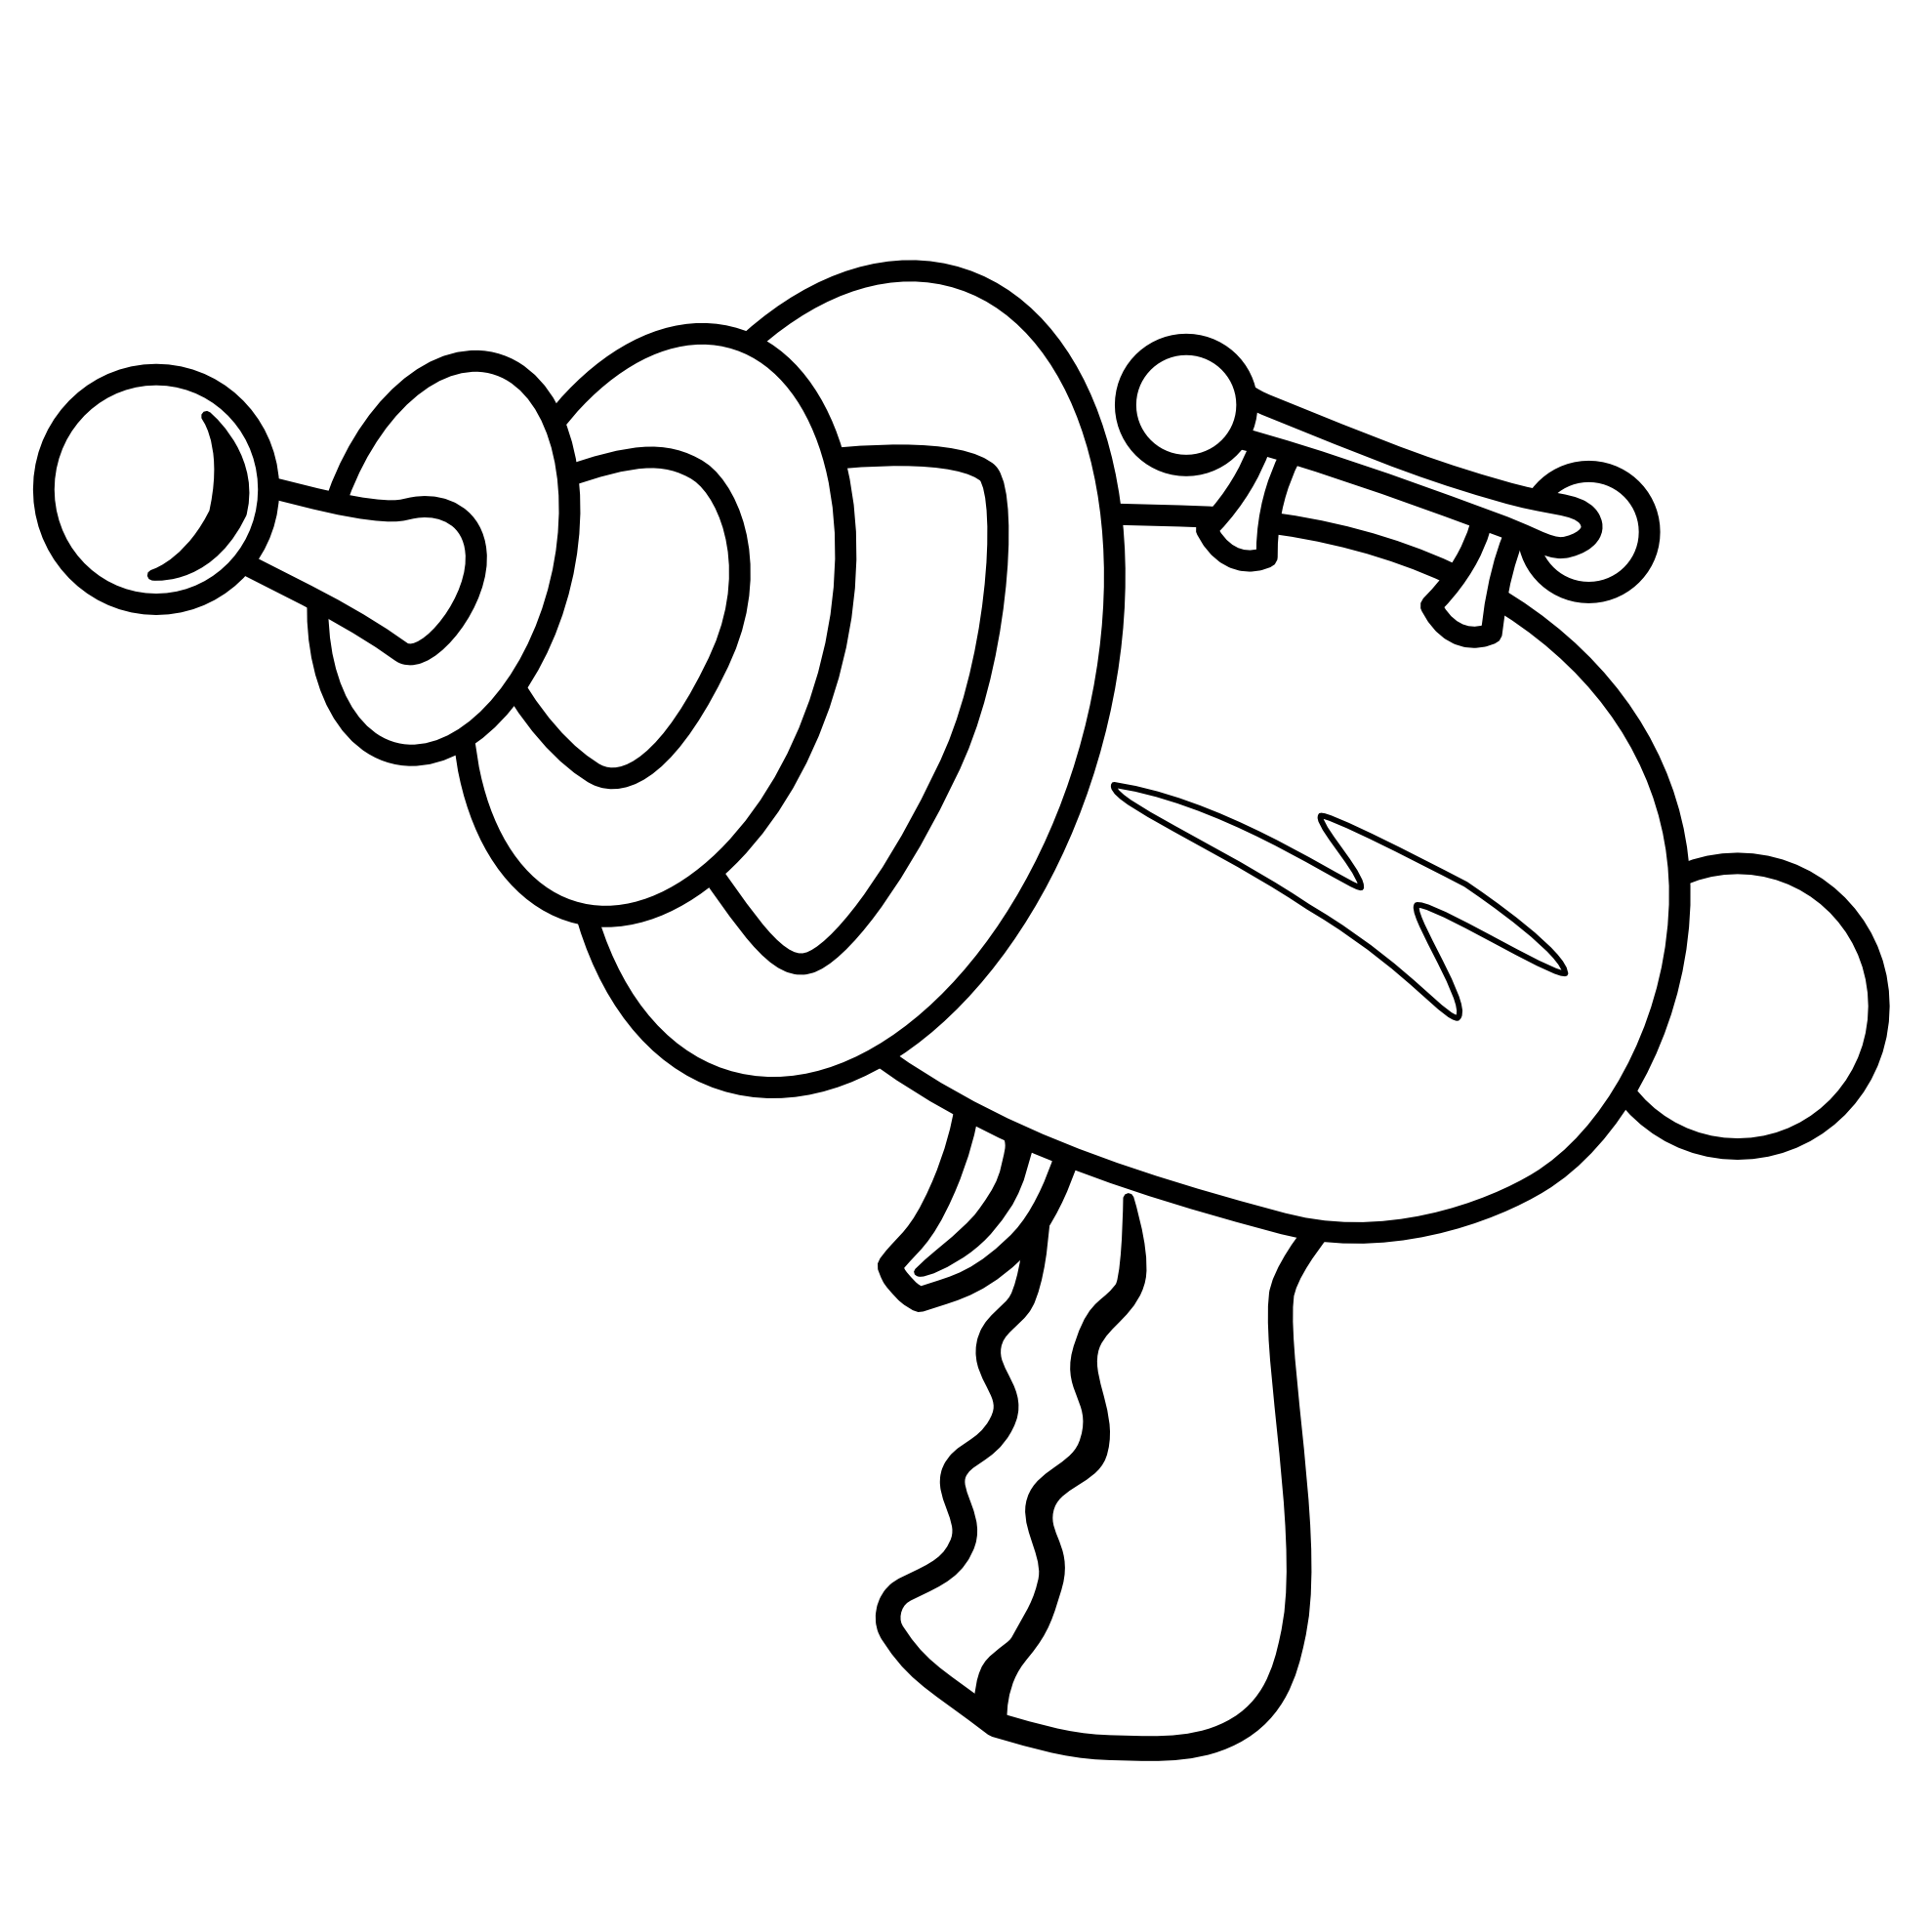 Pix For Laser Tag Clipart. Guns clipart black and white - .